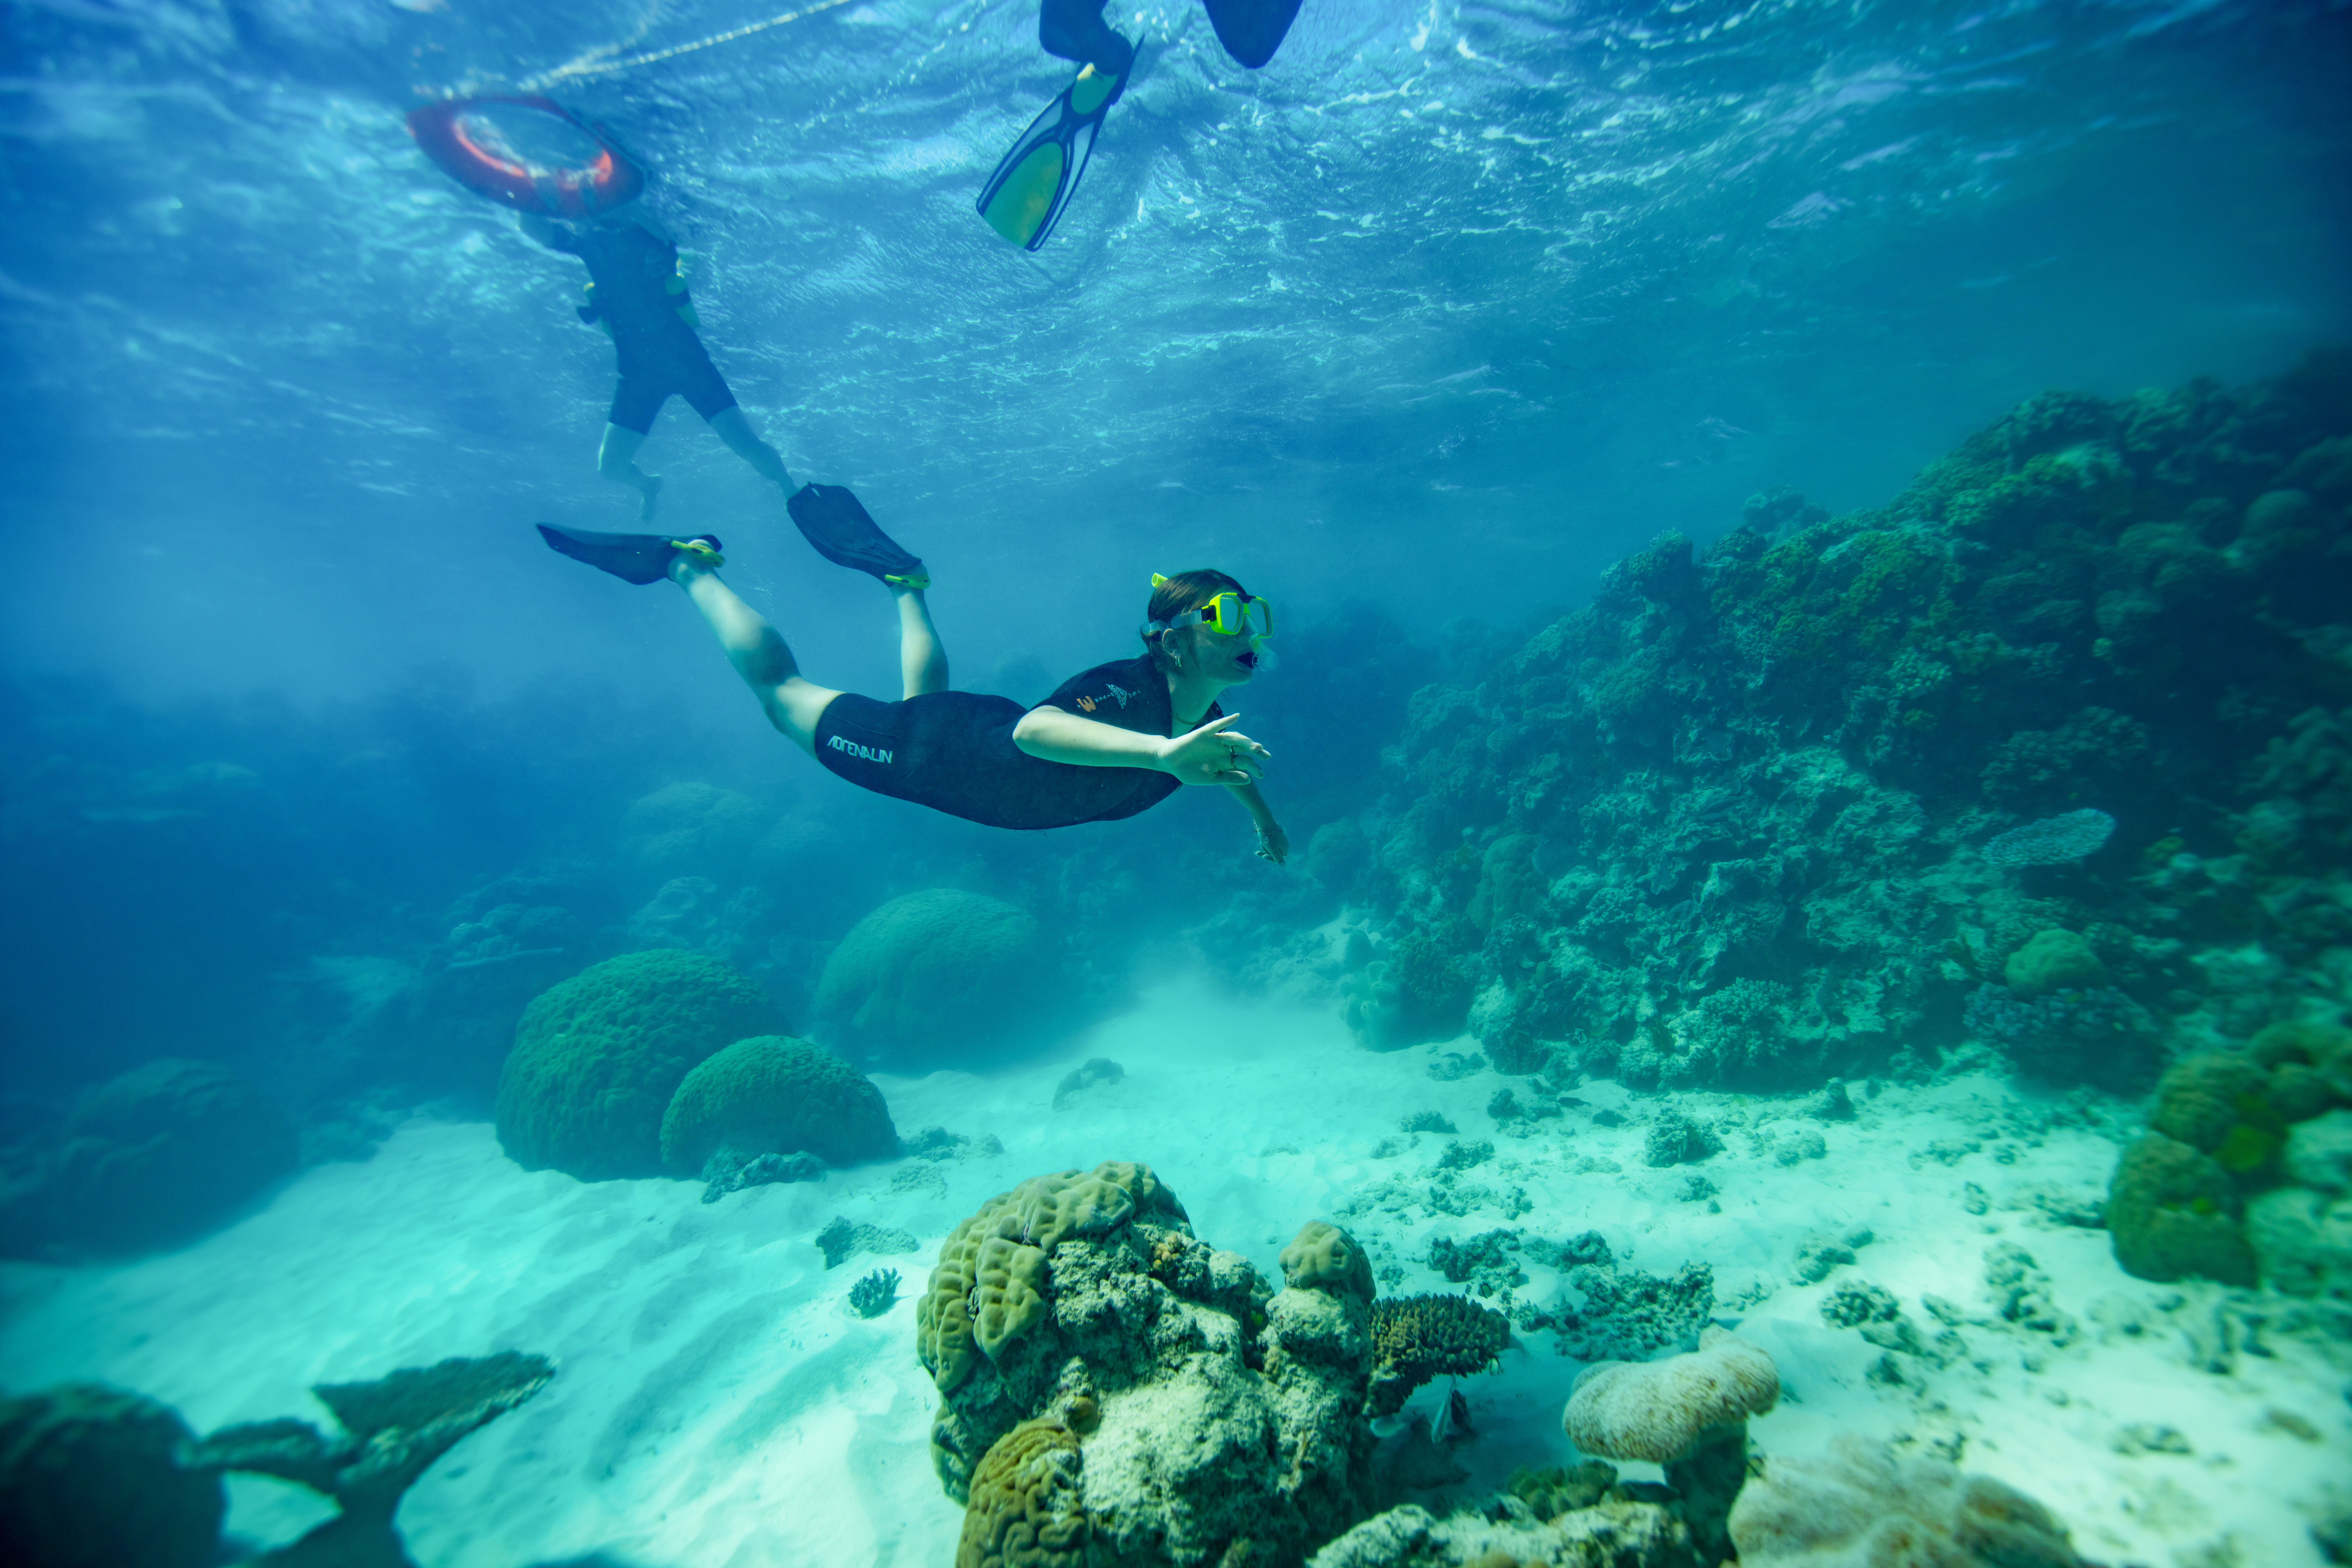 Take a once-in-a-lifetime snorkelling and diving trip on the Great Barrier Reef